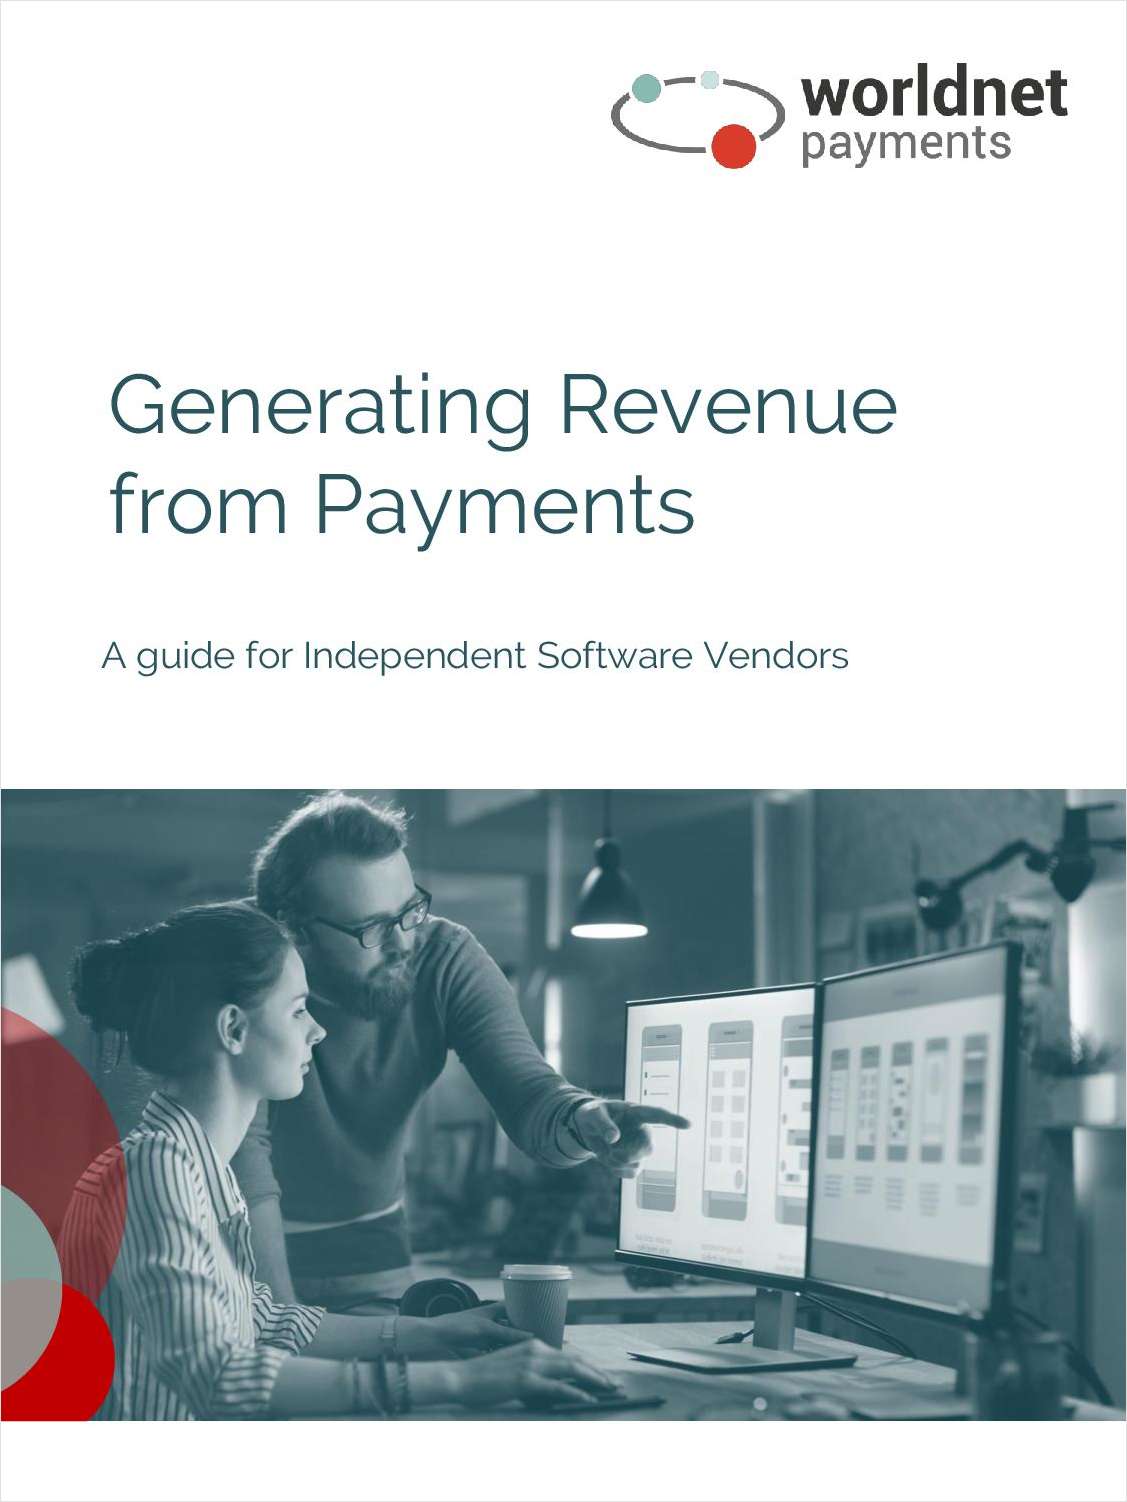 Discover 5 Ways to Generate More Revenue from Your Software with Payments